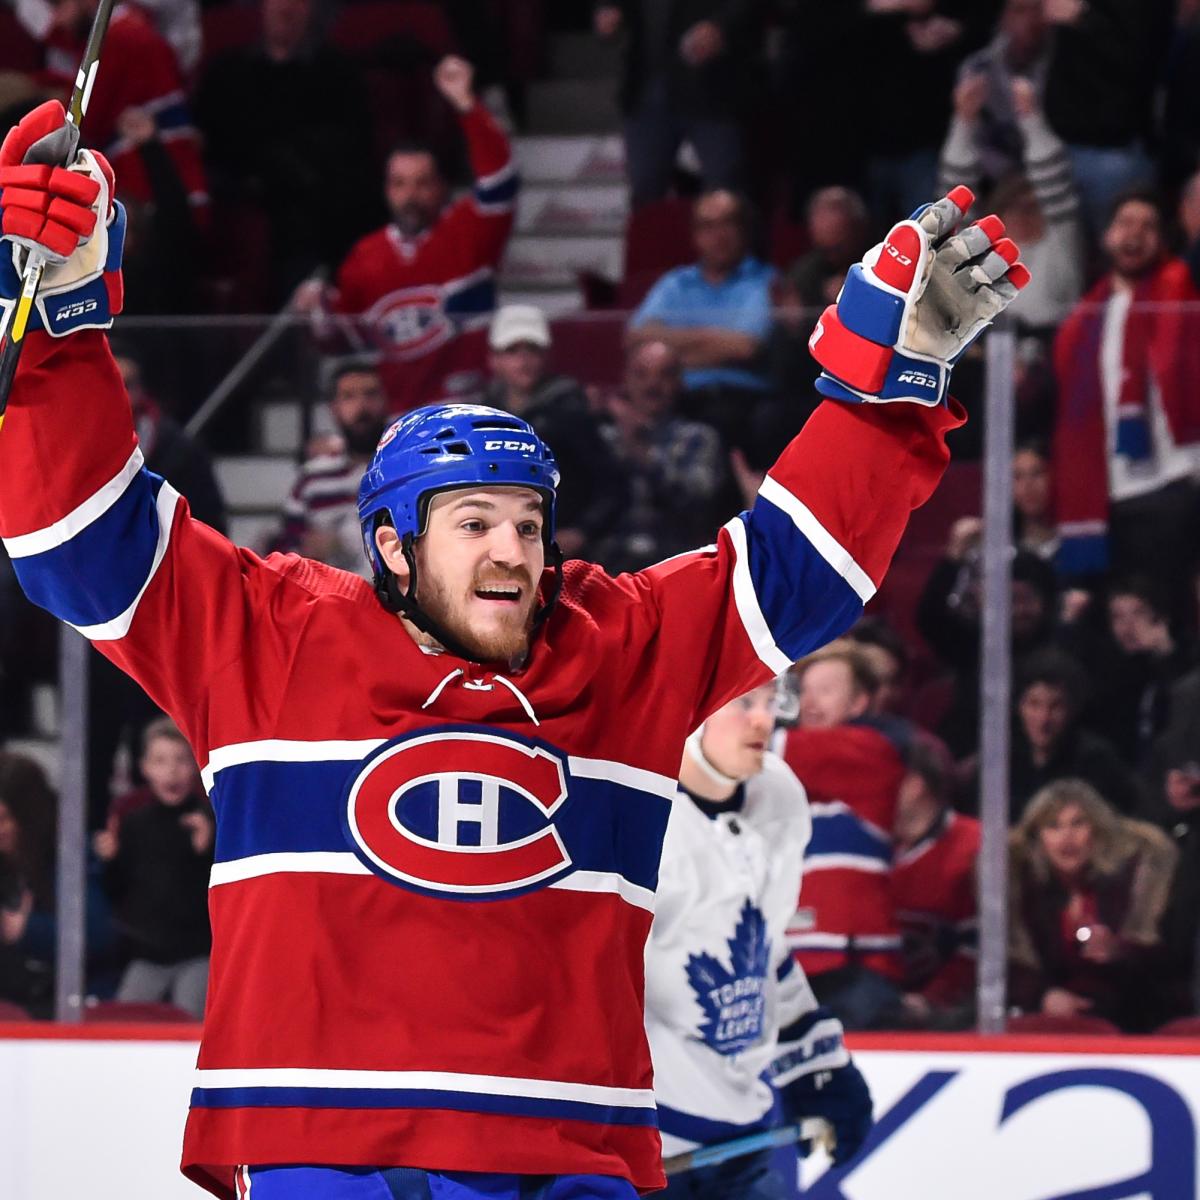 Habs' uniforms named best in NHL, NFL, NBA and MLB - NBC Sports